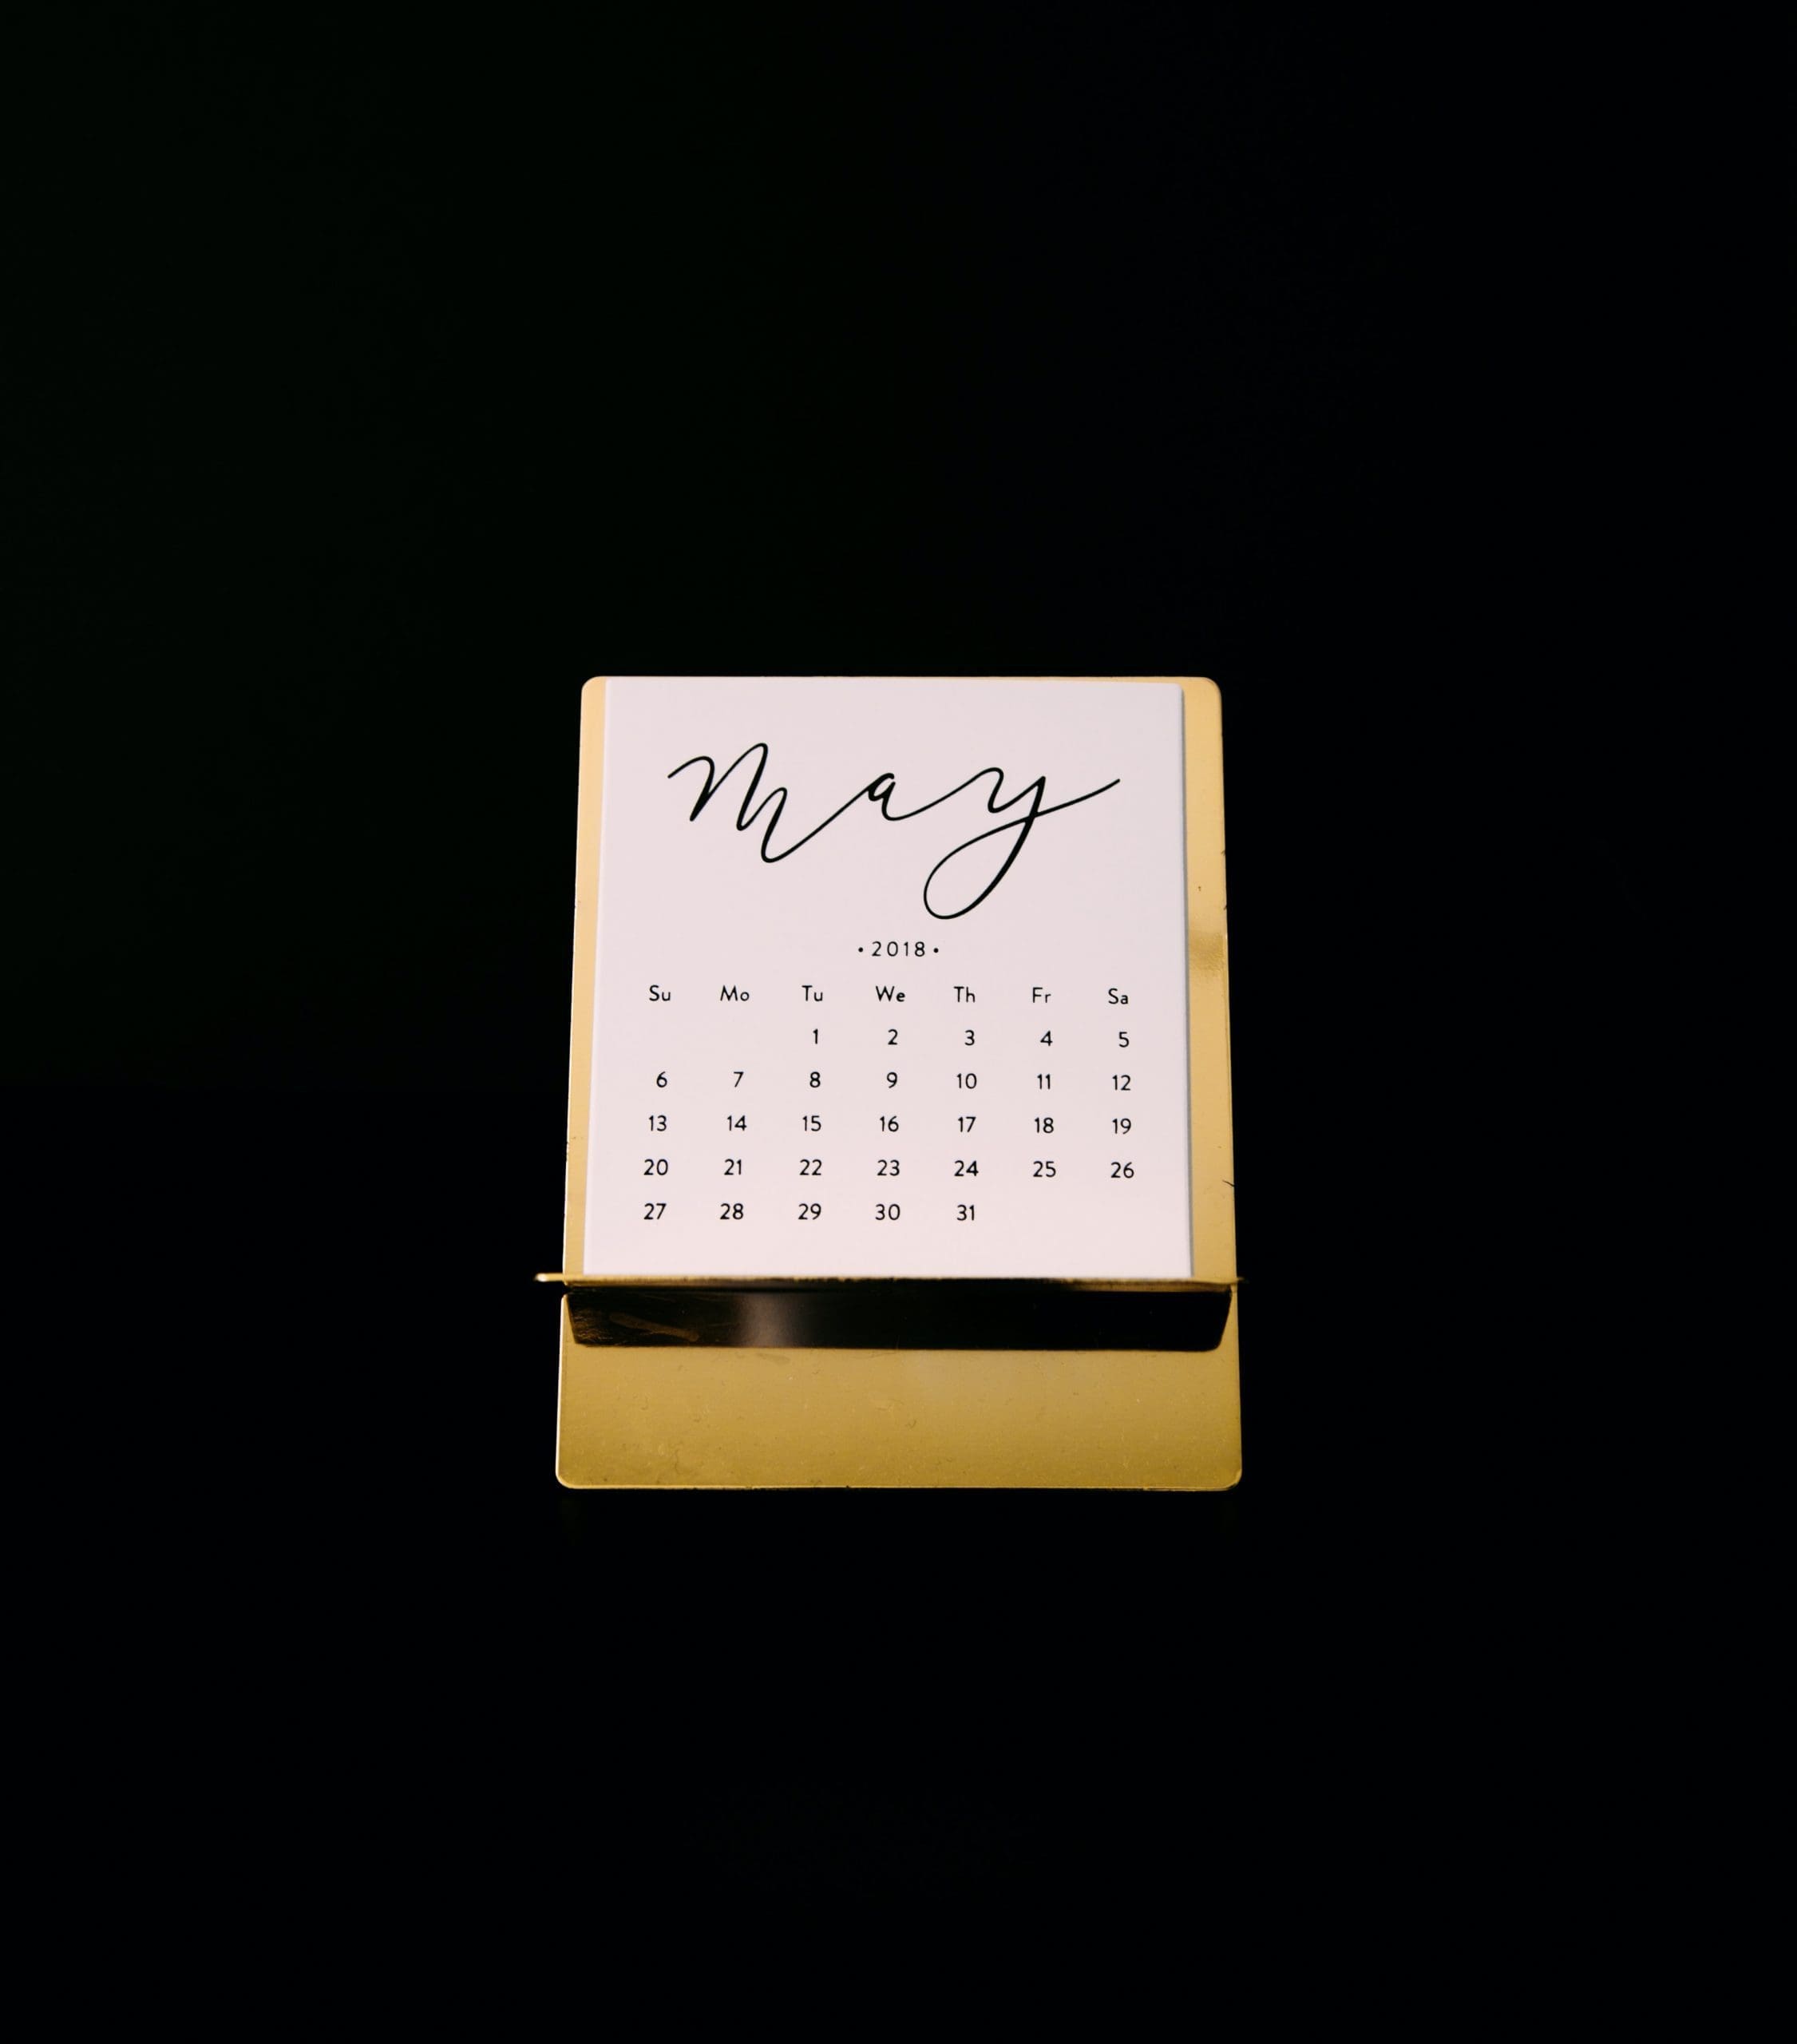 May 2018 calendar day of the week